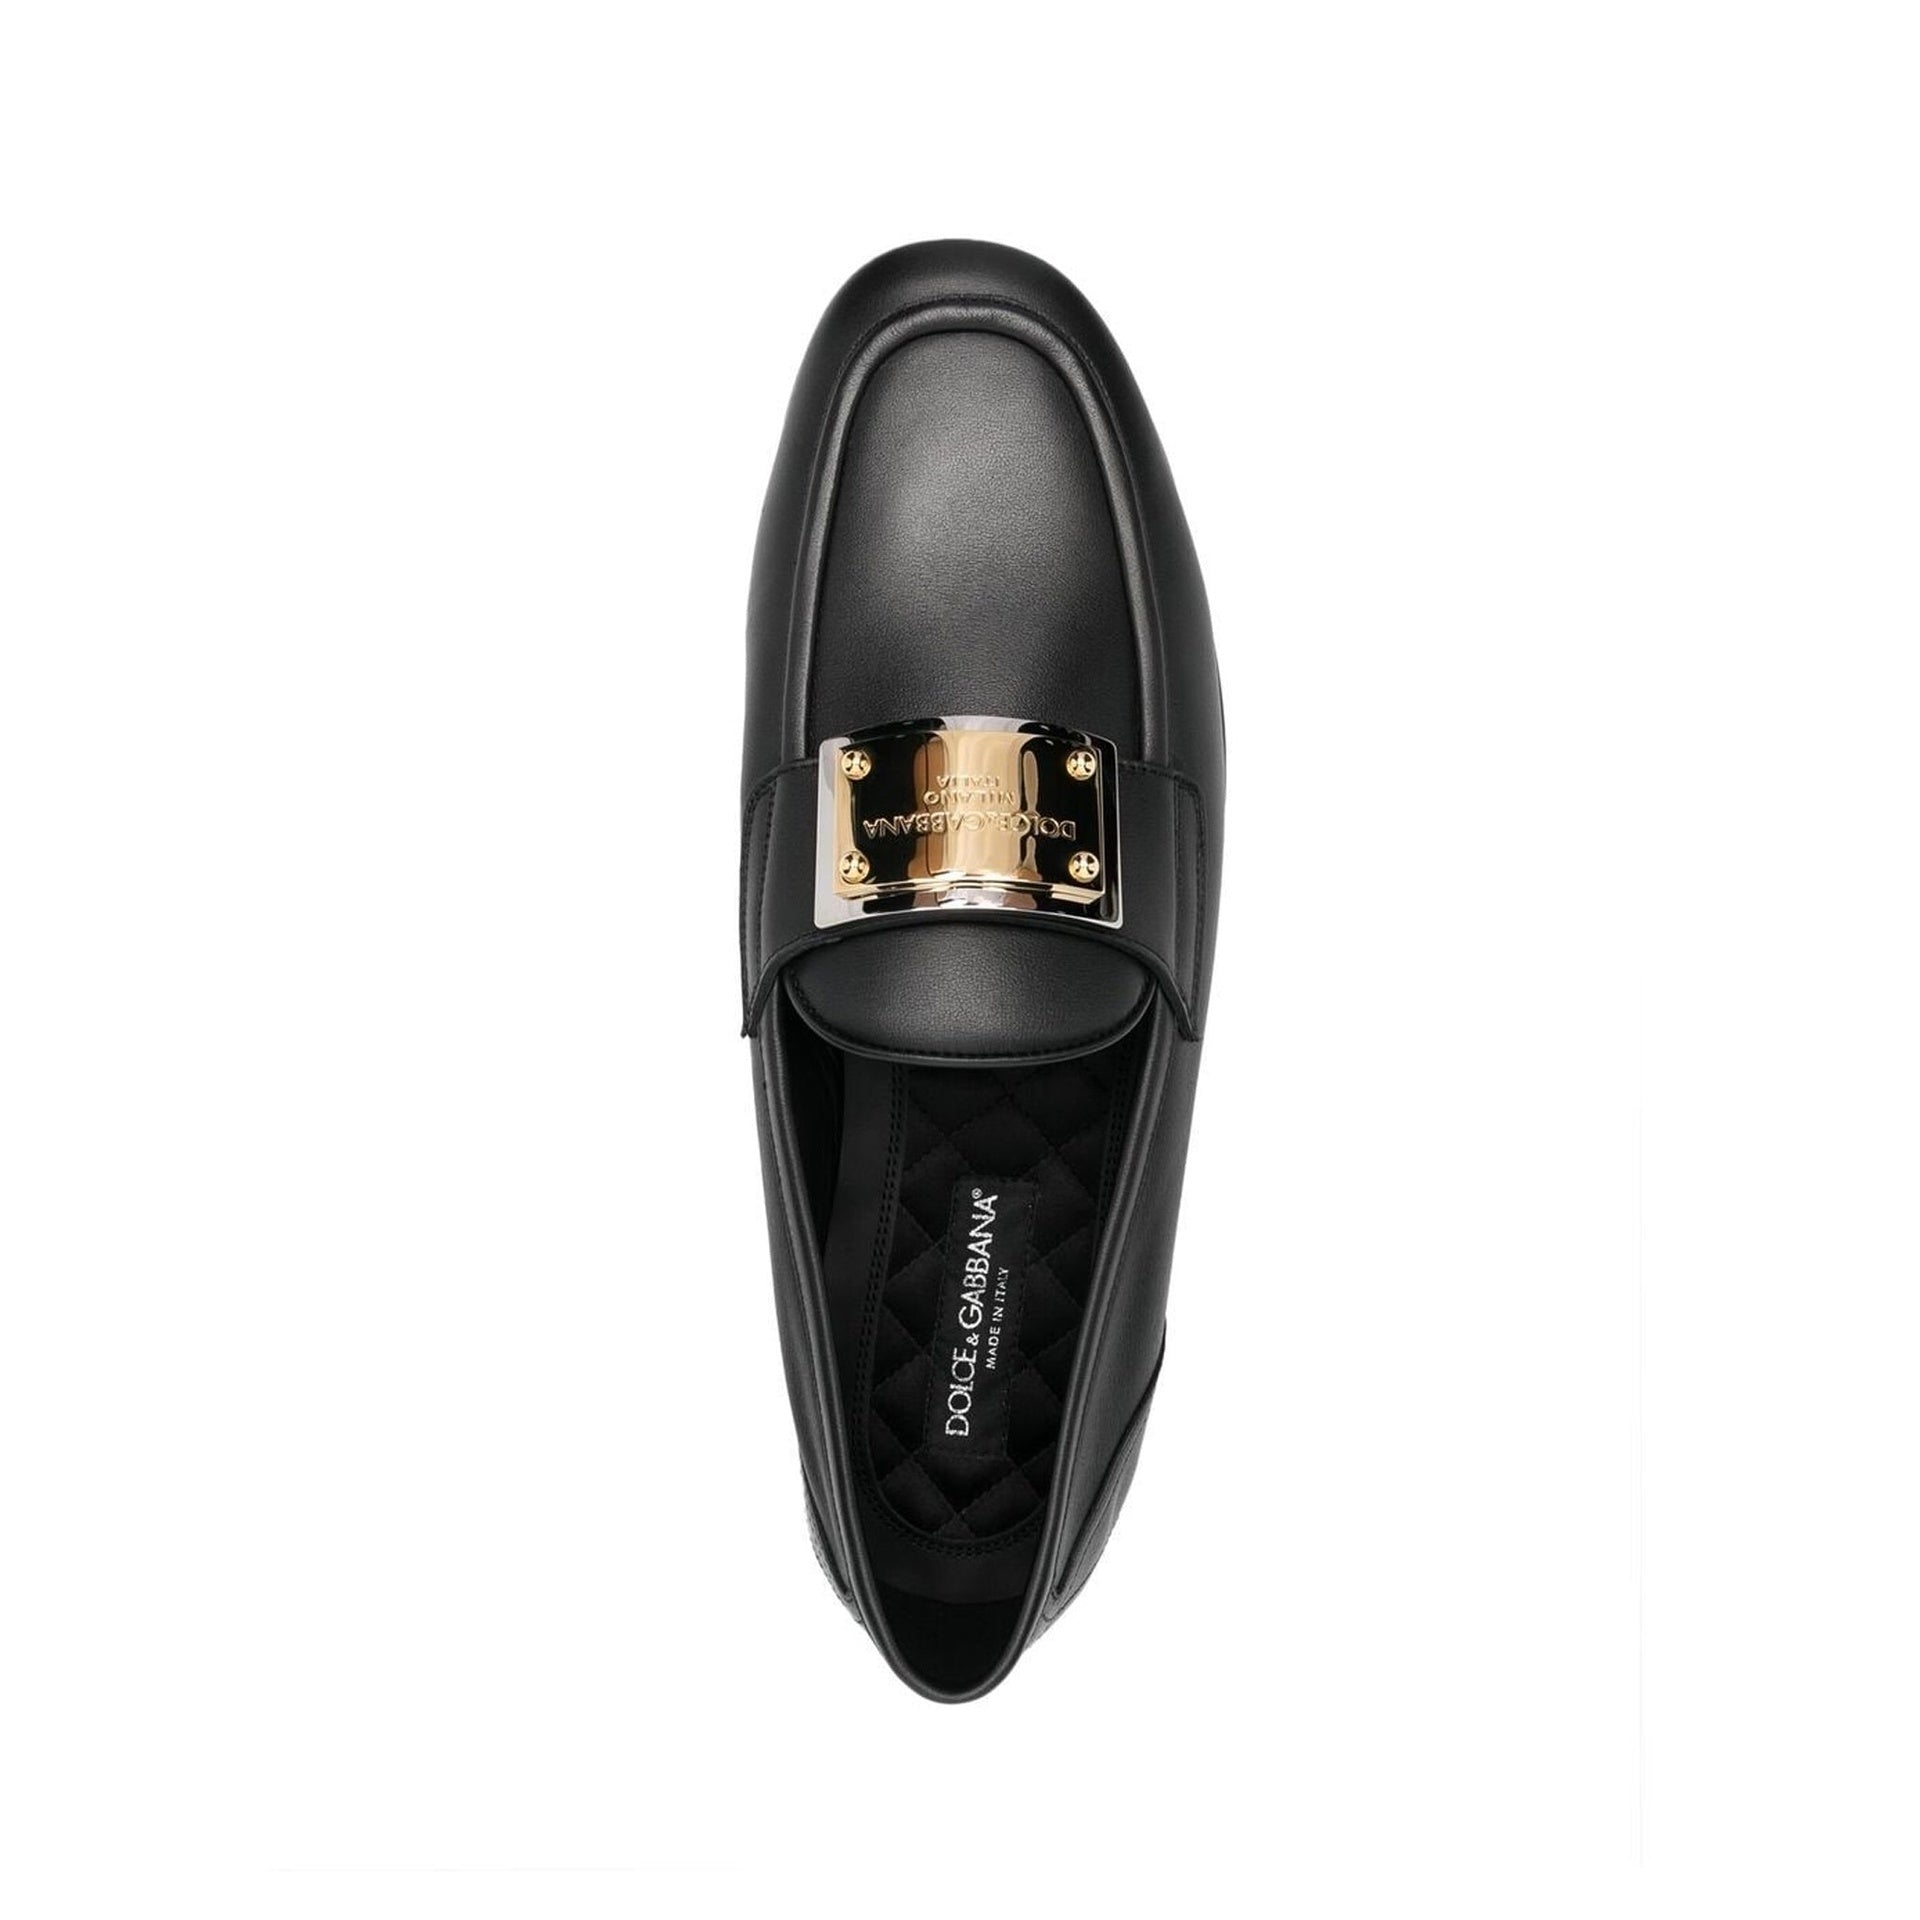 DOLCE-GABBANA-OUTLET-SALE-Dolce-Gabbana-Leather-Logo-Loafers-Flache-Schuhe-ARCHIVE-COLLECTION-4.jpg